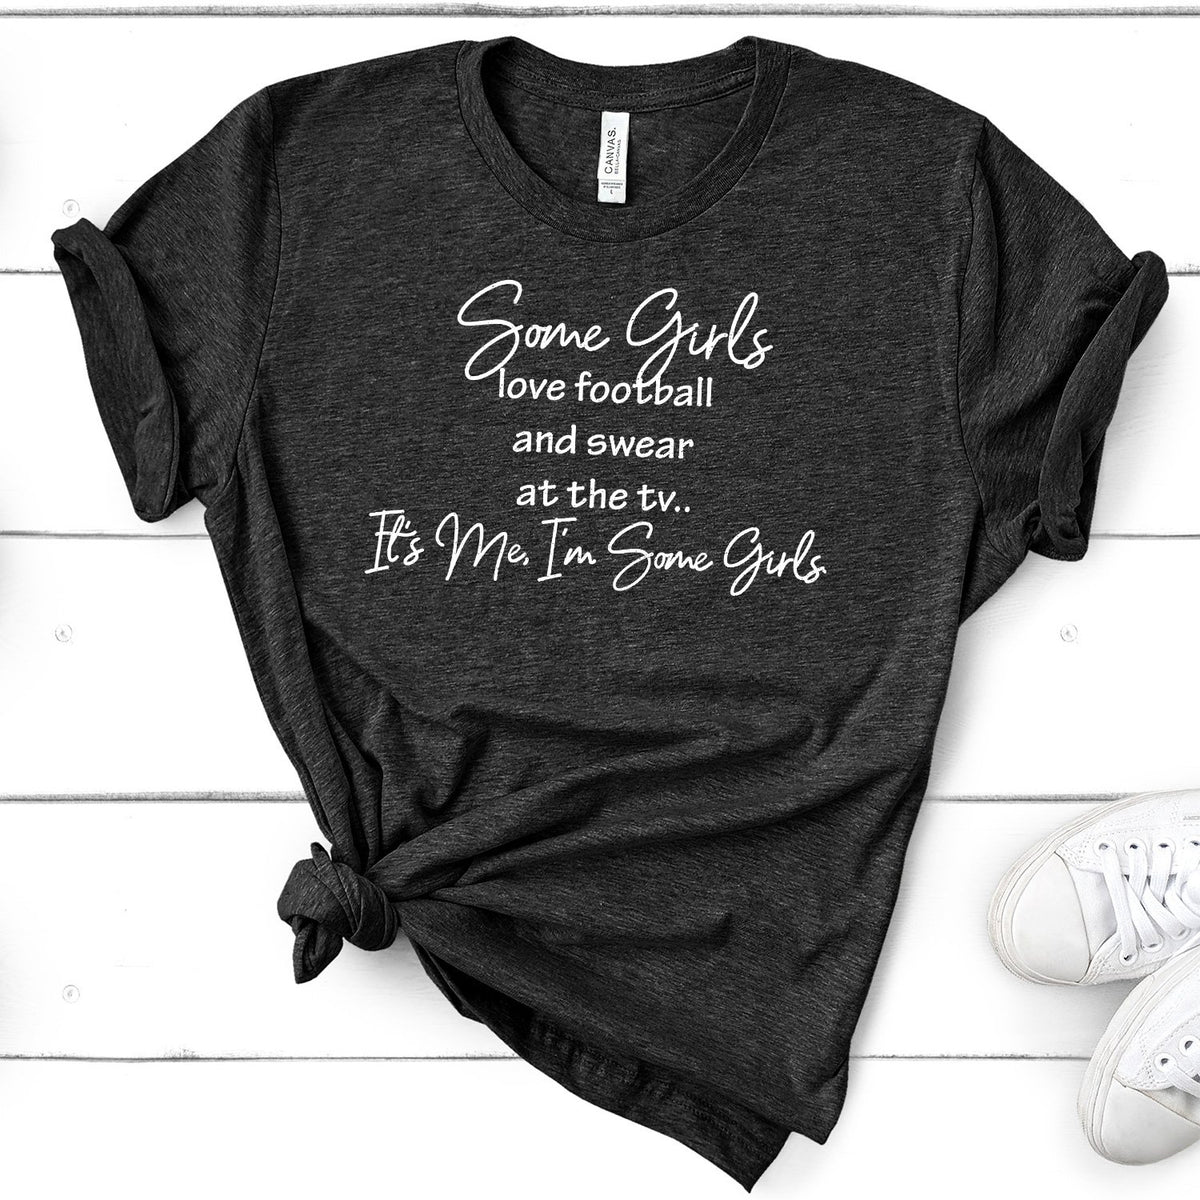 Some Girls Love Football and Swear at the TV - Short Sleeve Tee Shirt